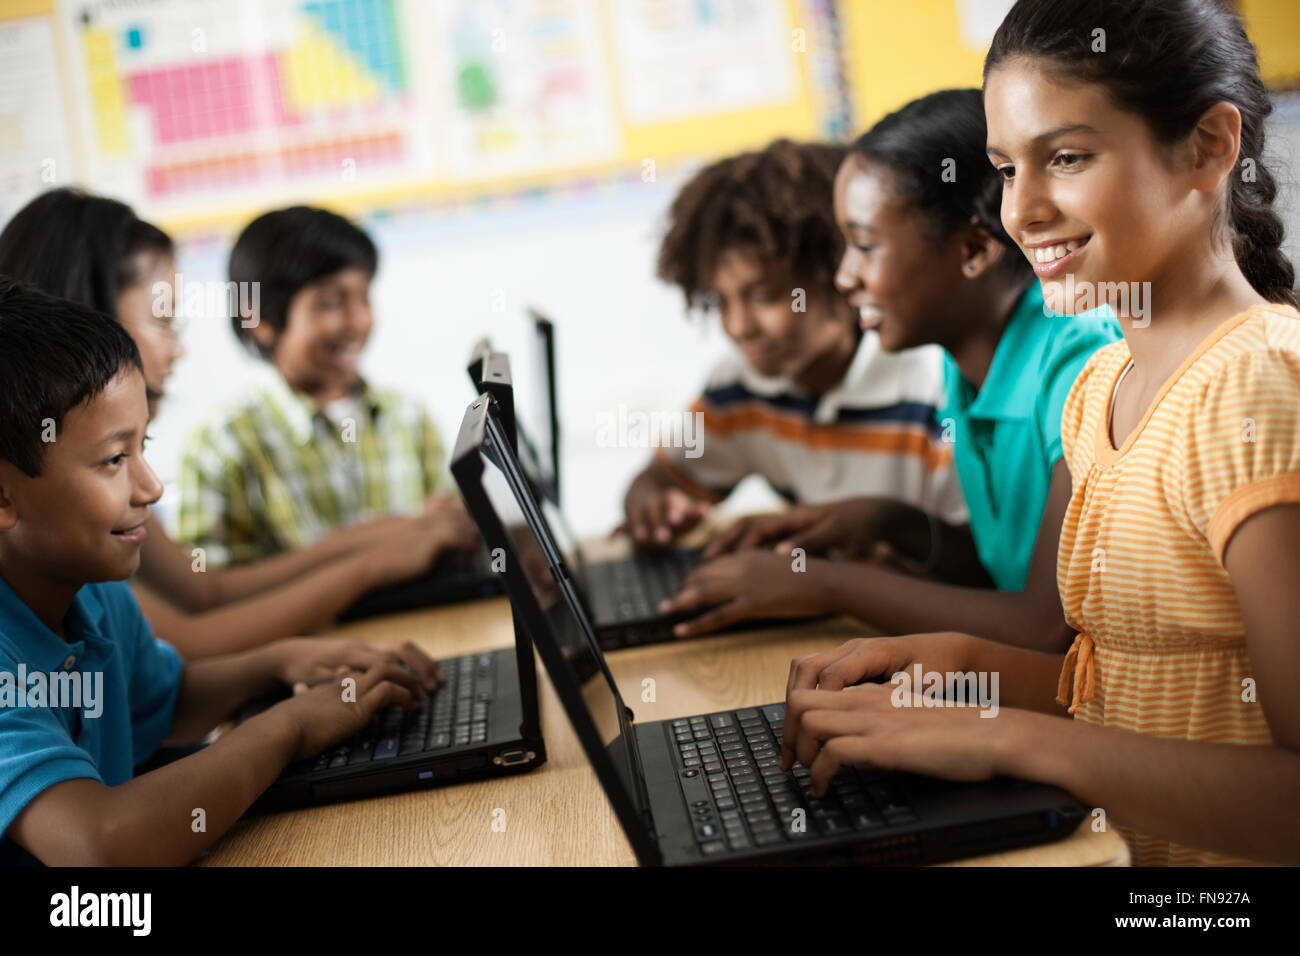 A group of students using laptops in a lesson. Stock Photo